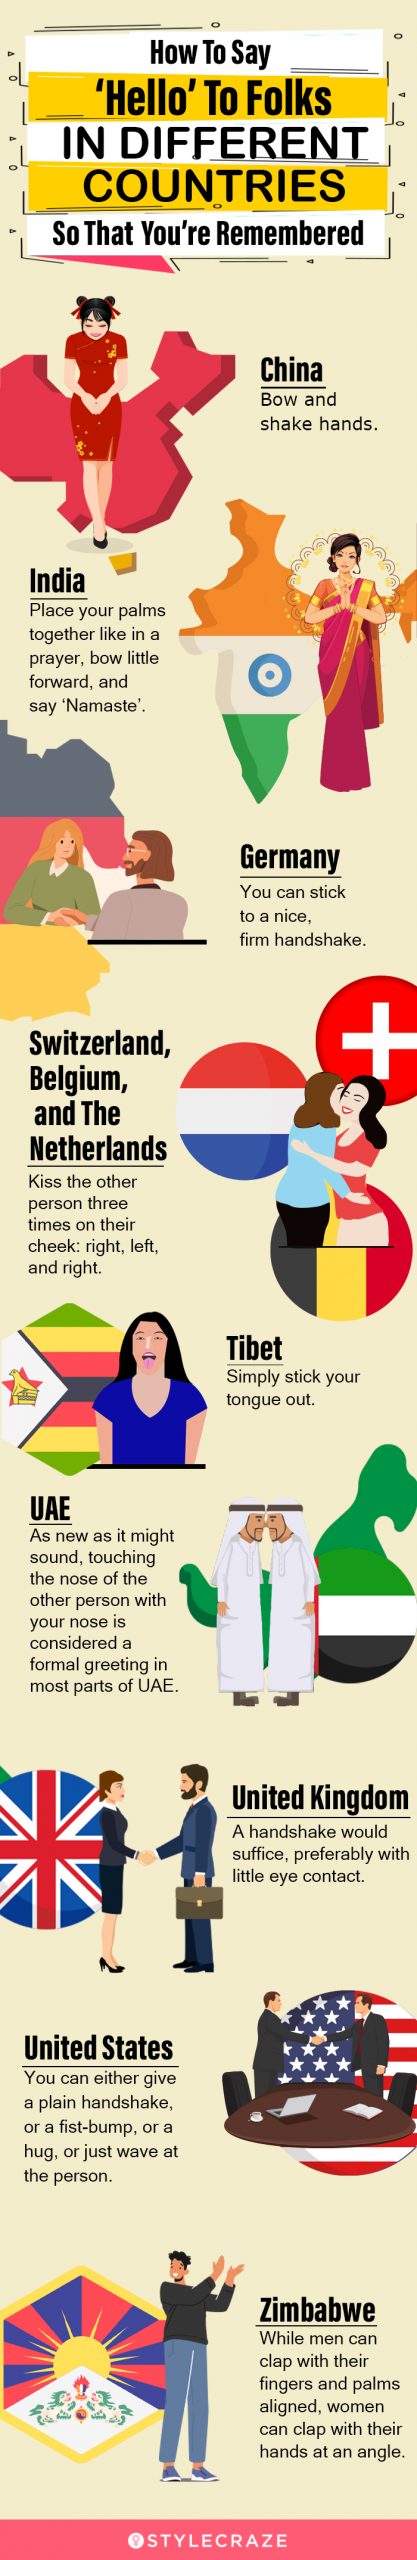 how to say ‘hello’ to folks in different countries so that you’re remembered (infographic)